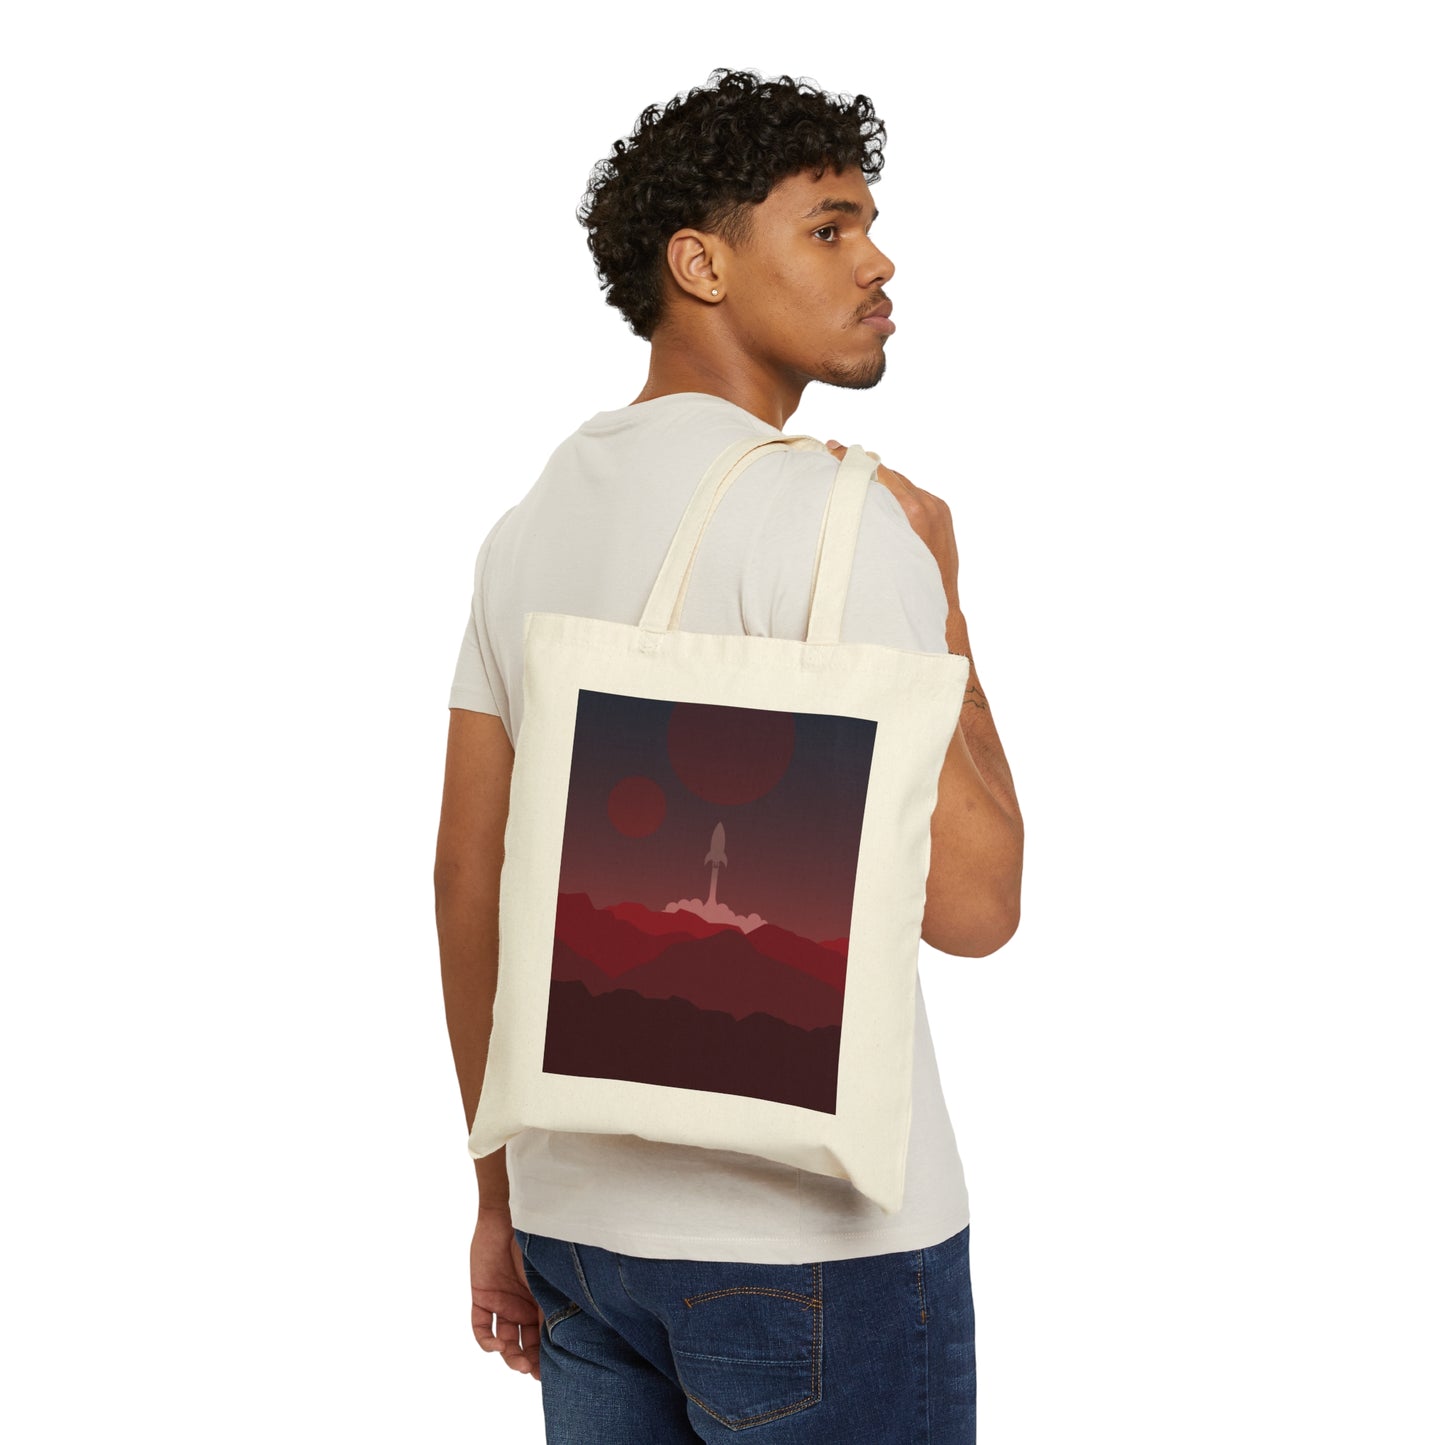 Visit Red Planet Aesthetic Welcome to Mars Sci fi Space Minimal Art Aliens Canvas Shopping Cotton Tote Bag